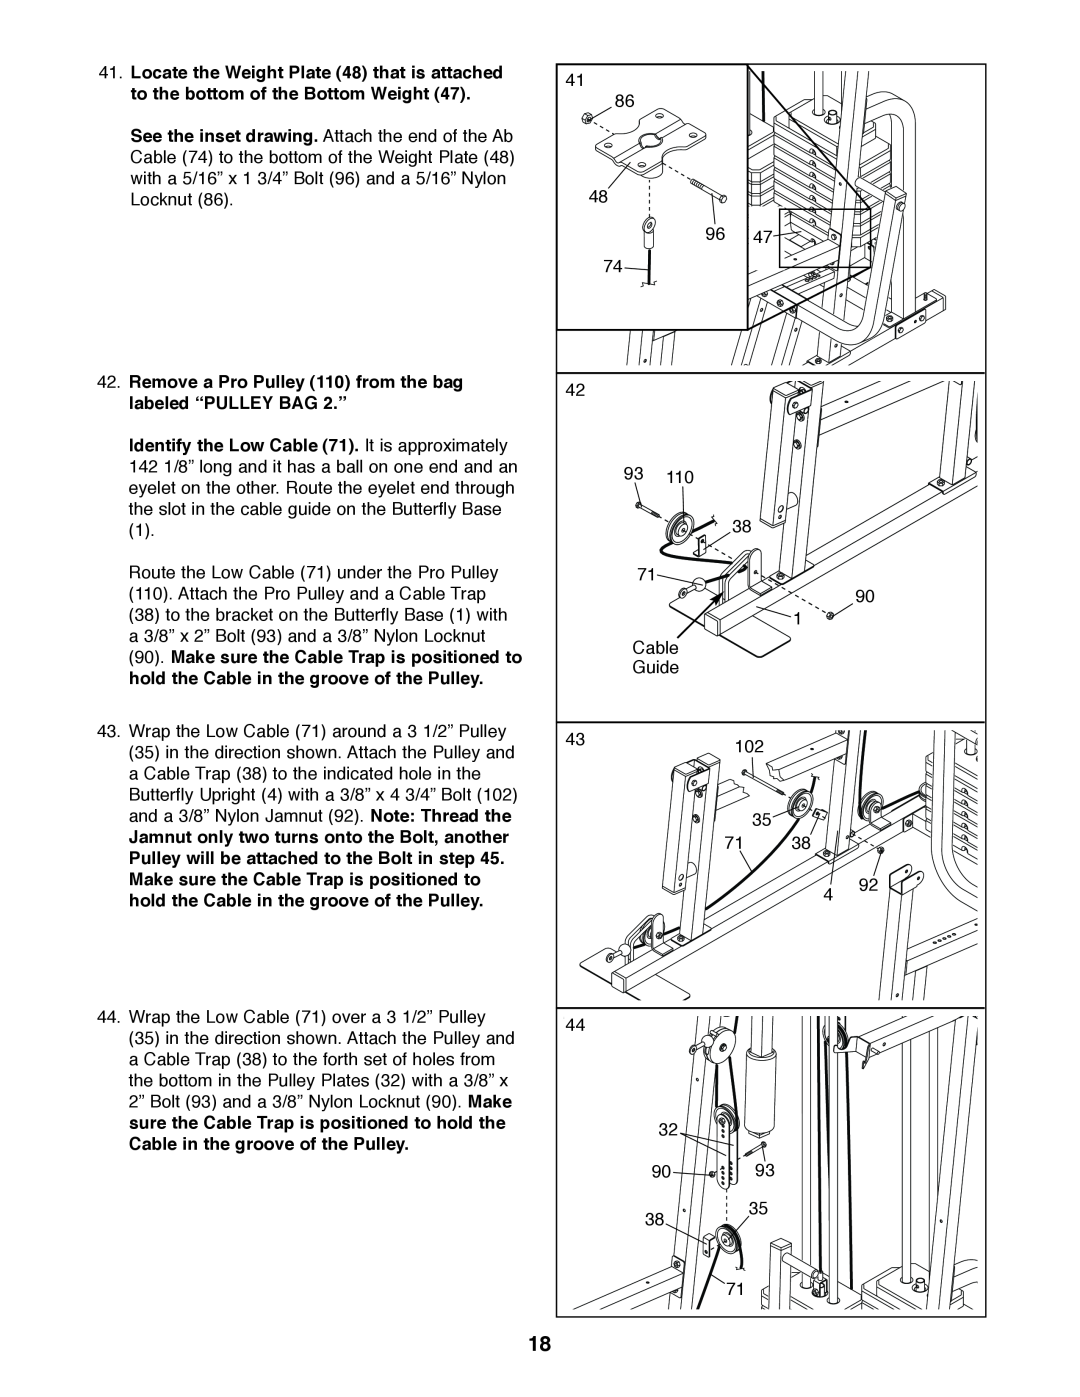 Weider 831.159830 user manual Remove a Pro Pulley 110 from the bag labeled “PULLEY BAG 2.” 